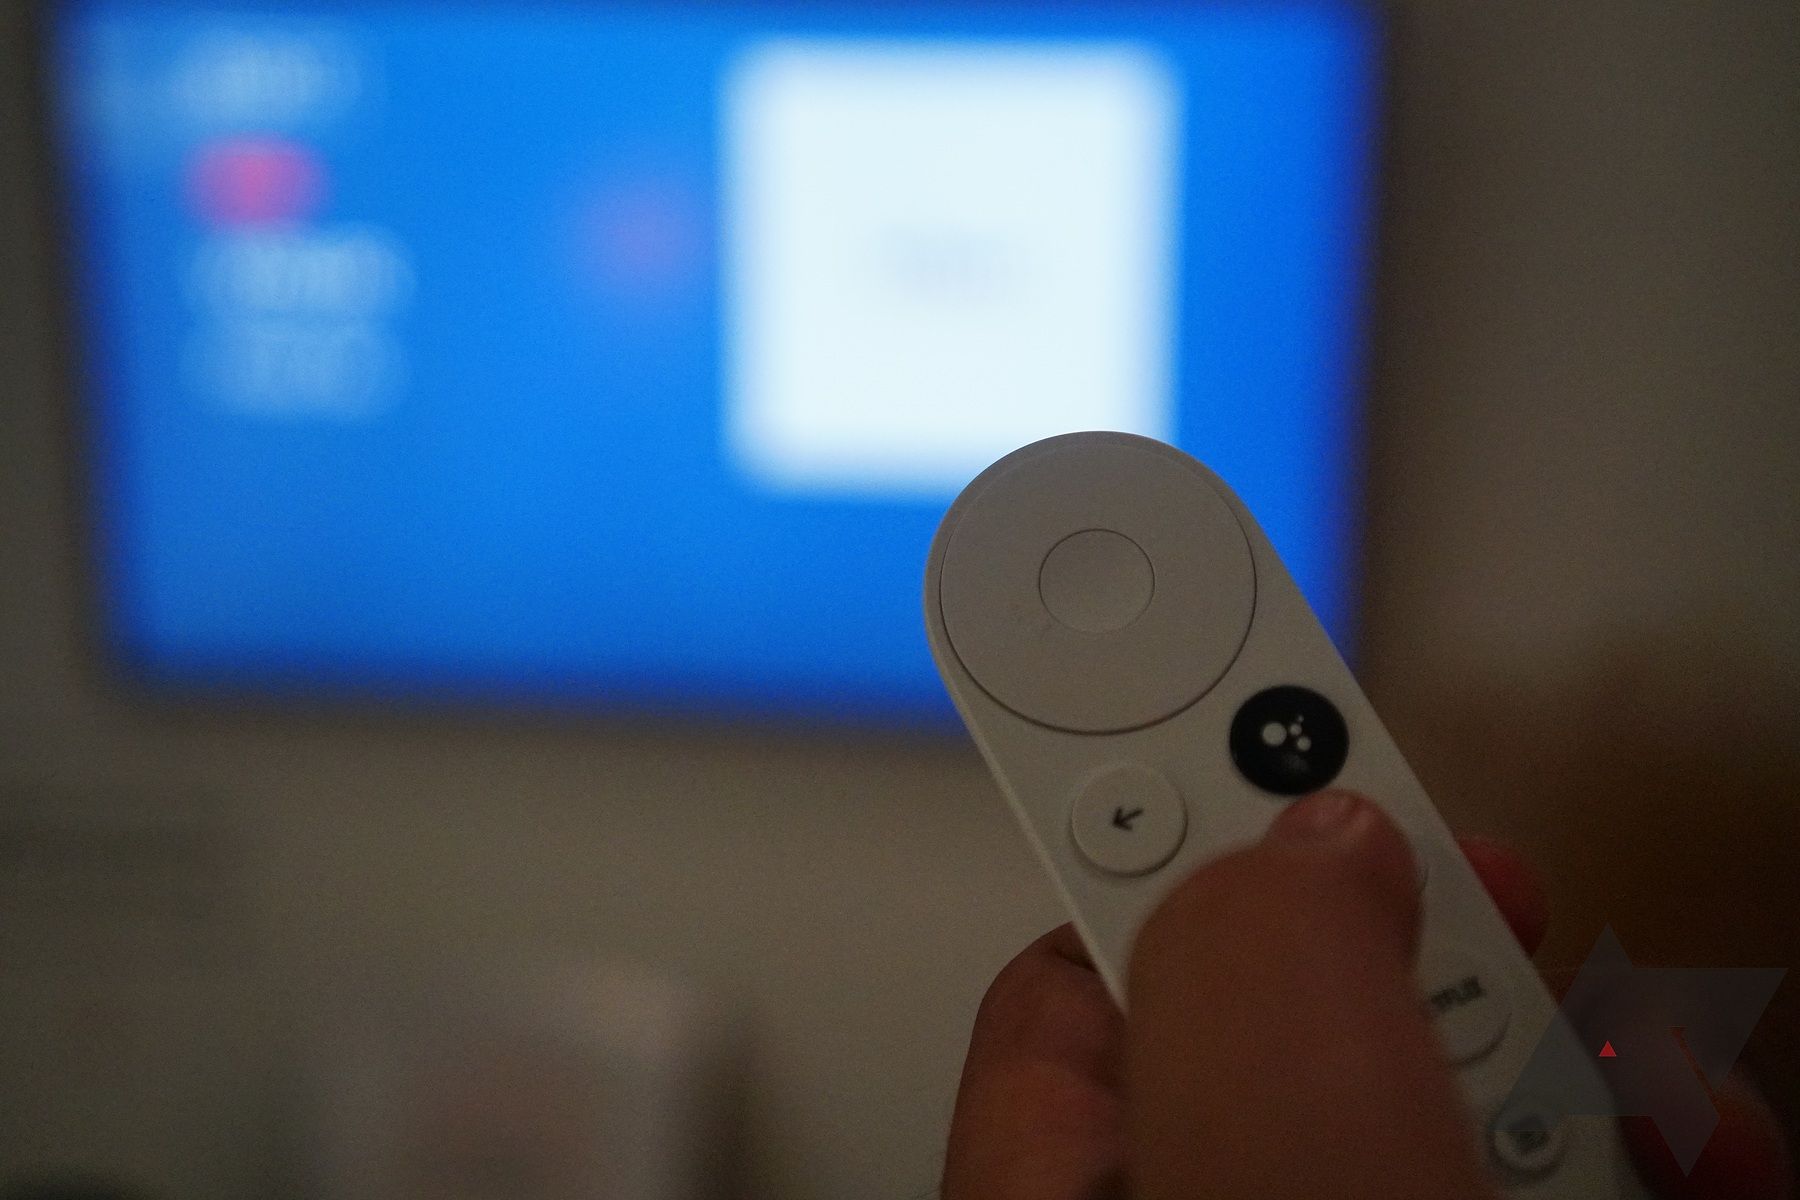 Hand using a white Google Chromecast remote with a blurry TV in the background.